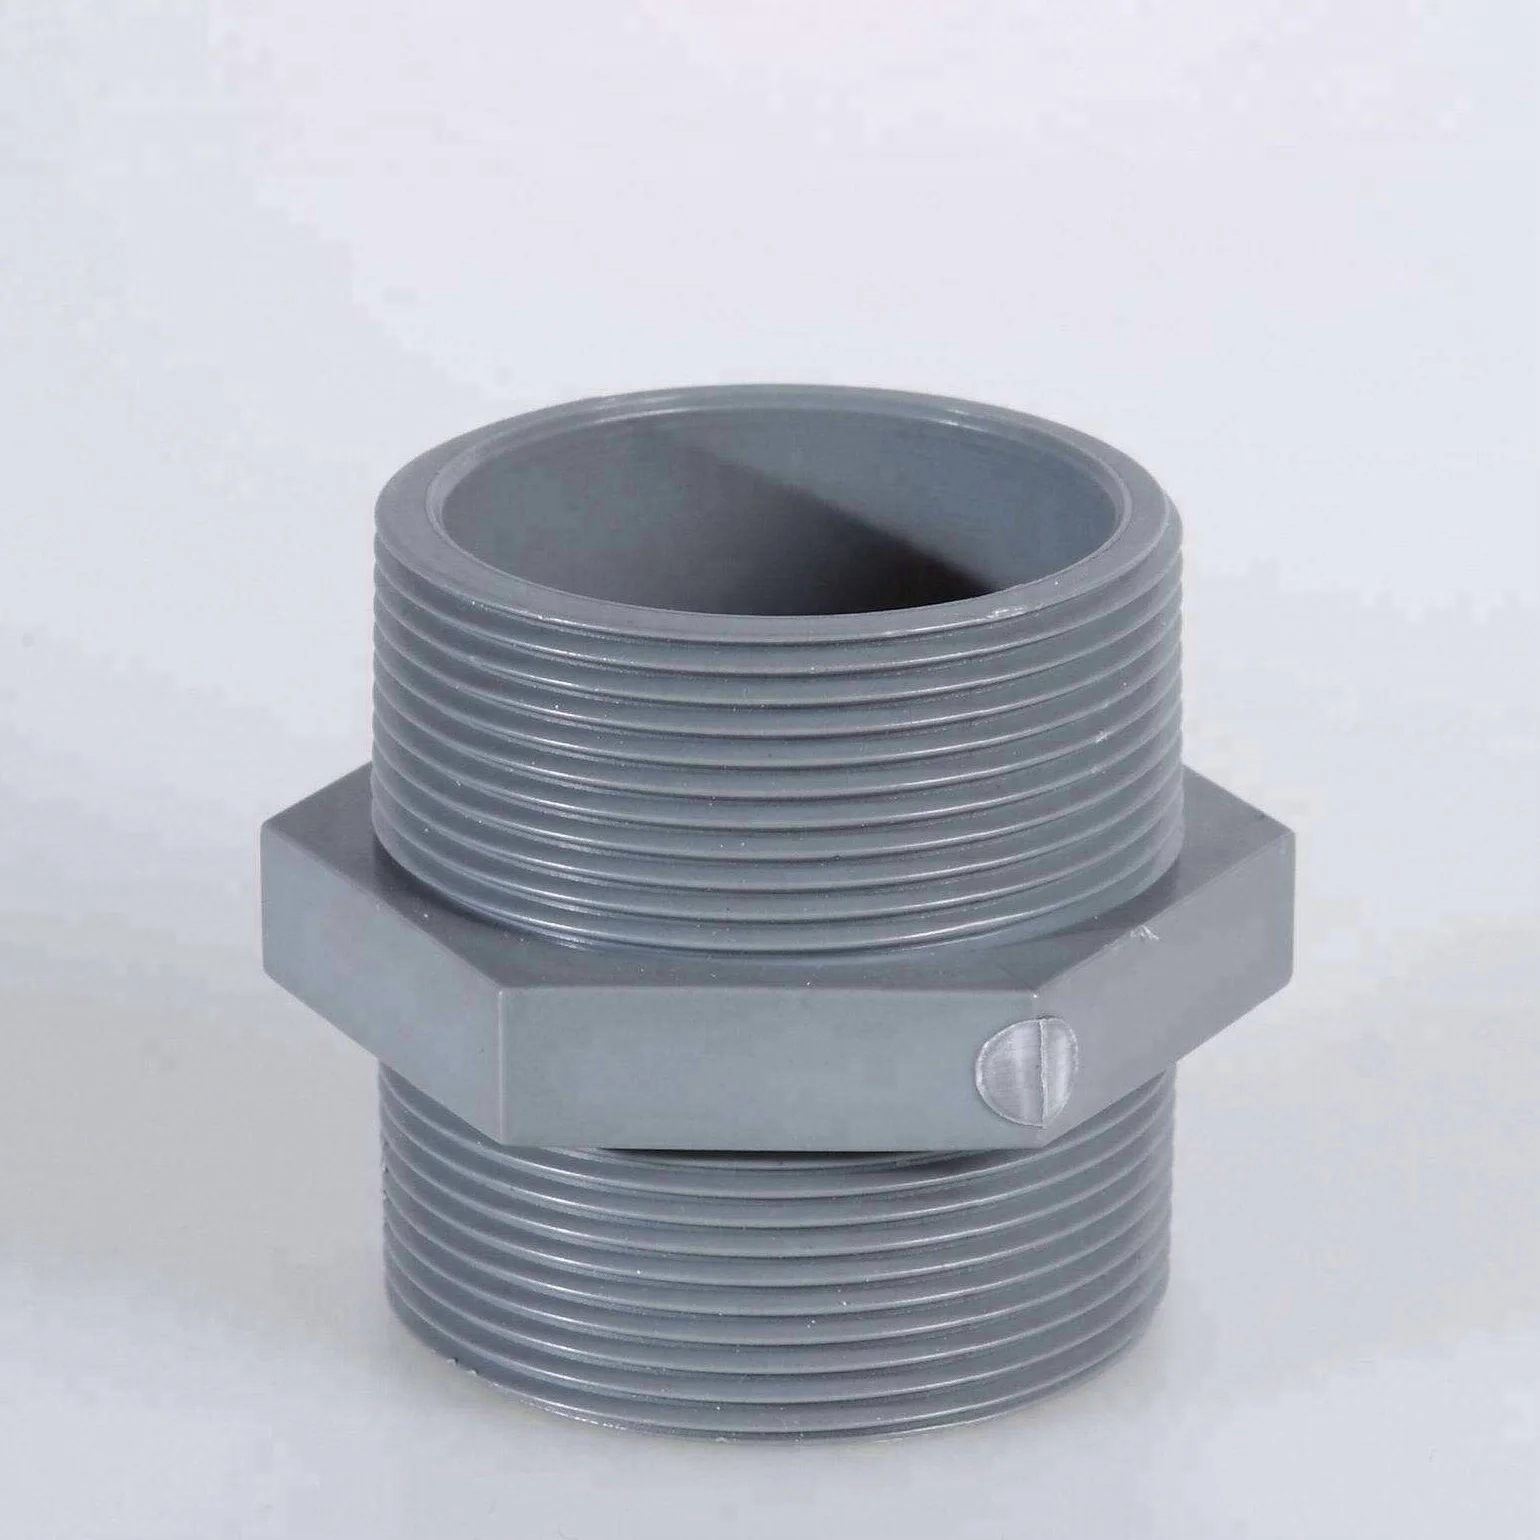 Pvc Pipe Fittings 1 2 3 4 Full Plastic Two Way Male Threaded Connector Buy Pvc Male Adapter Pvc Fittings 63mm Product On Alibaba Com